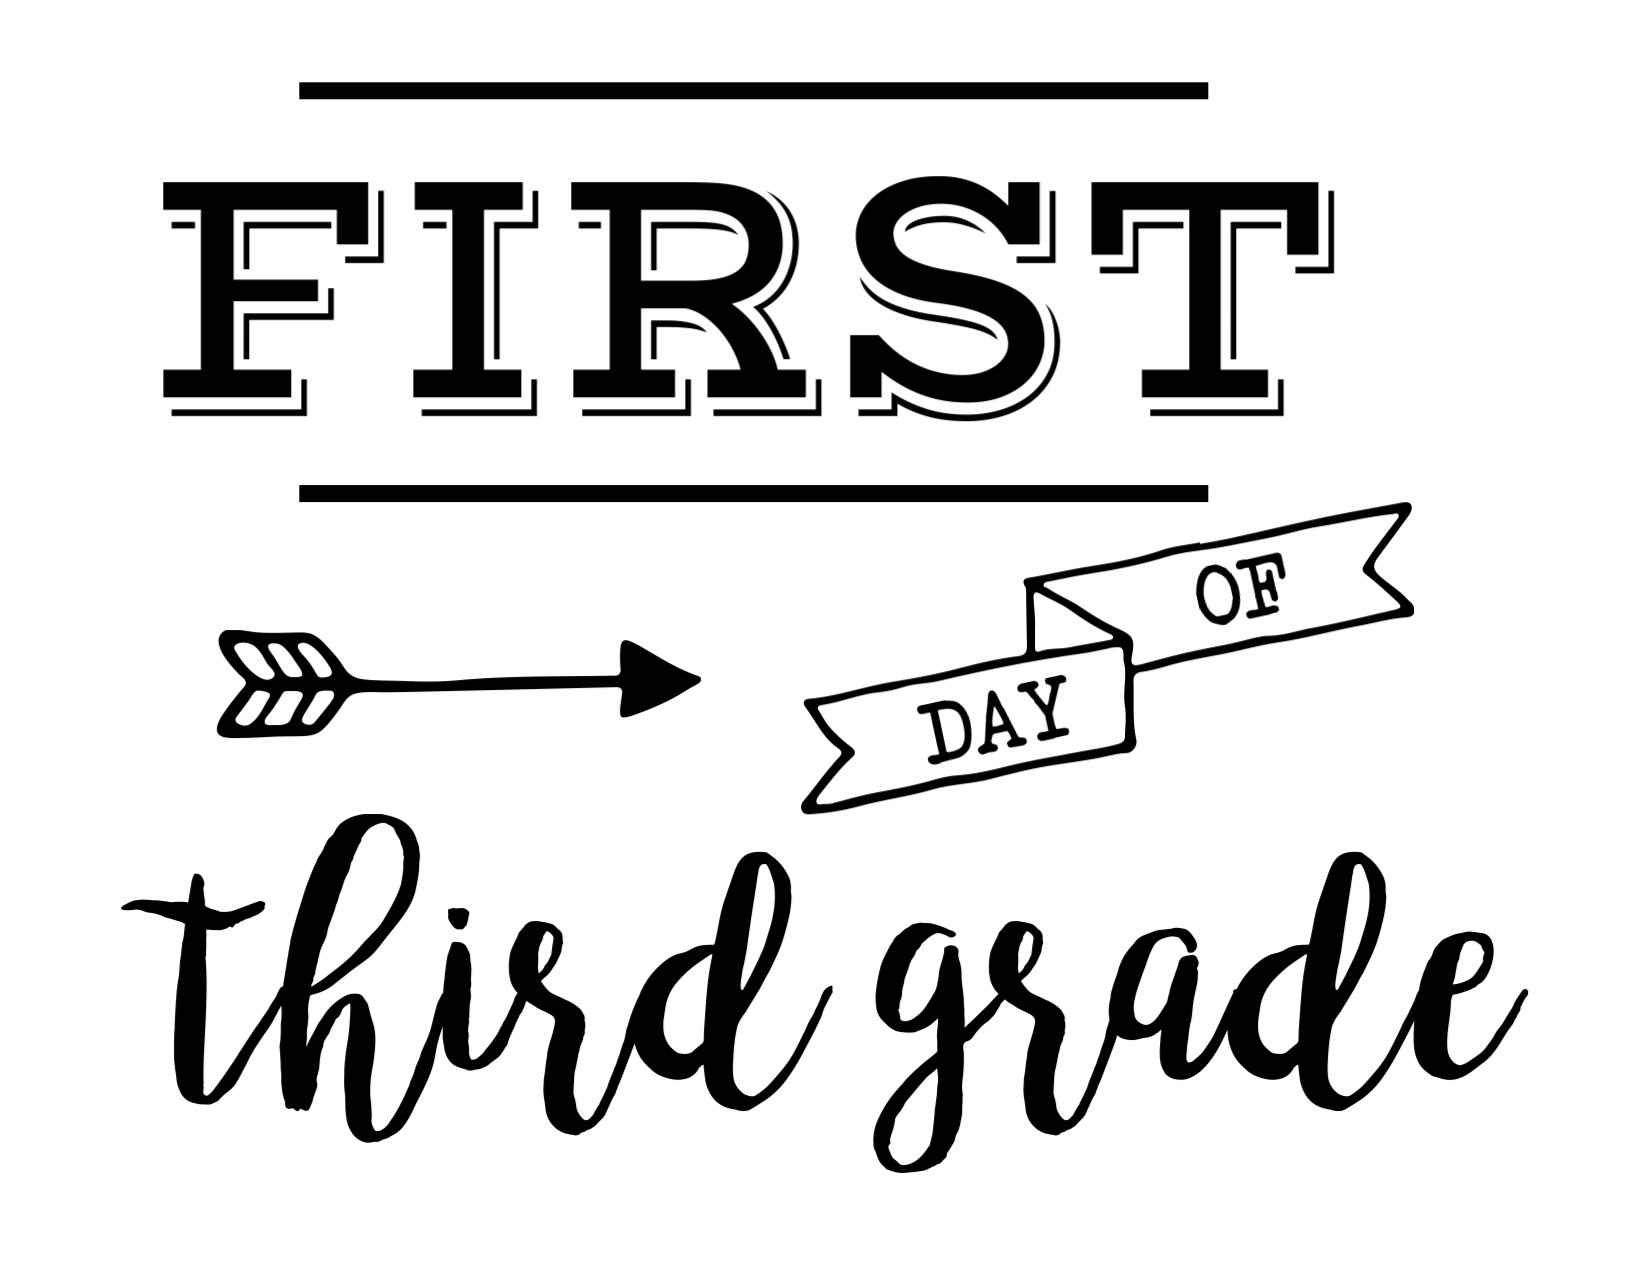 first-day-of-school-sign-free-printable-paper-trail-design